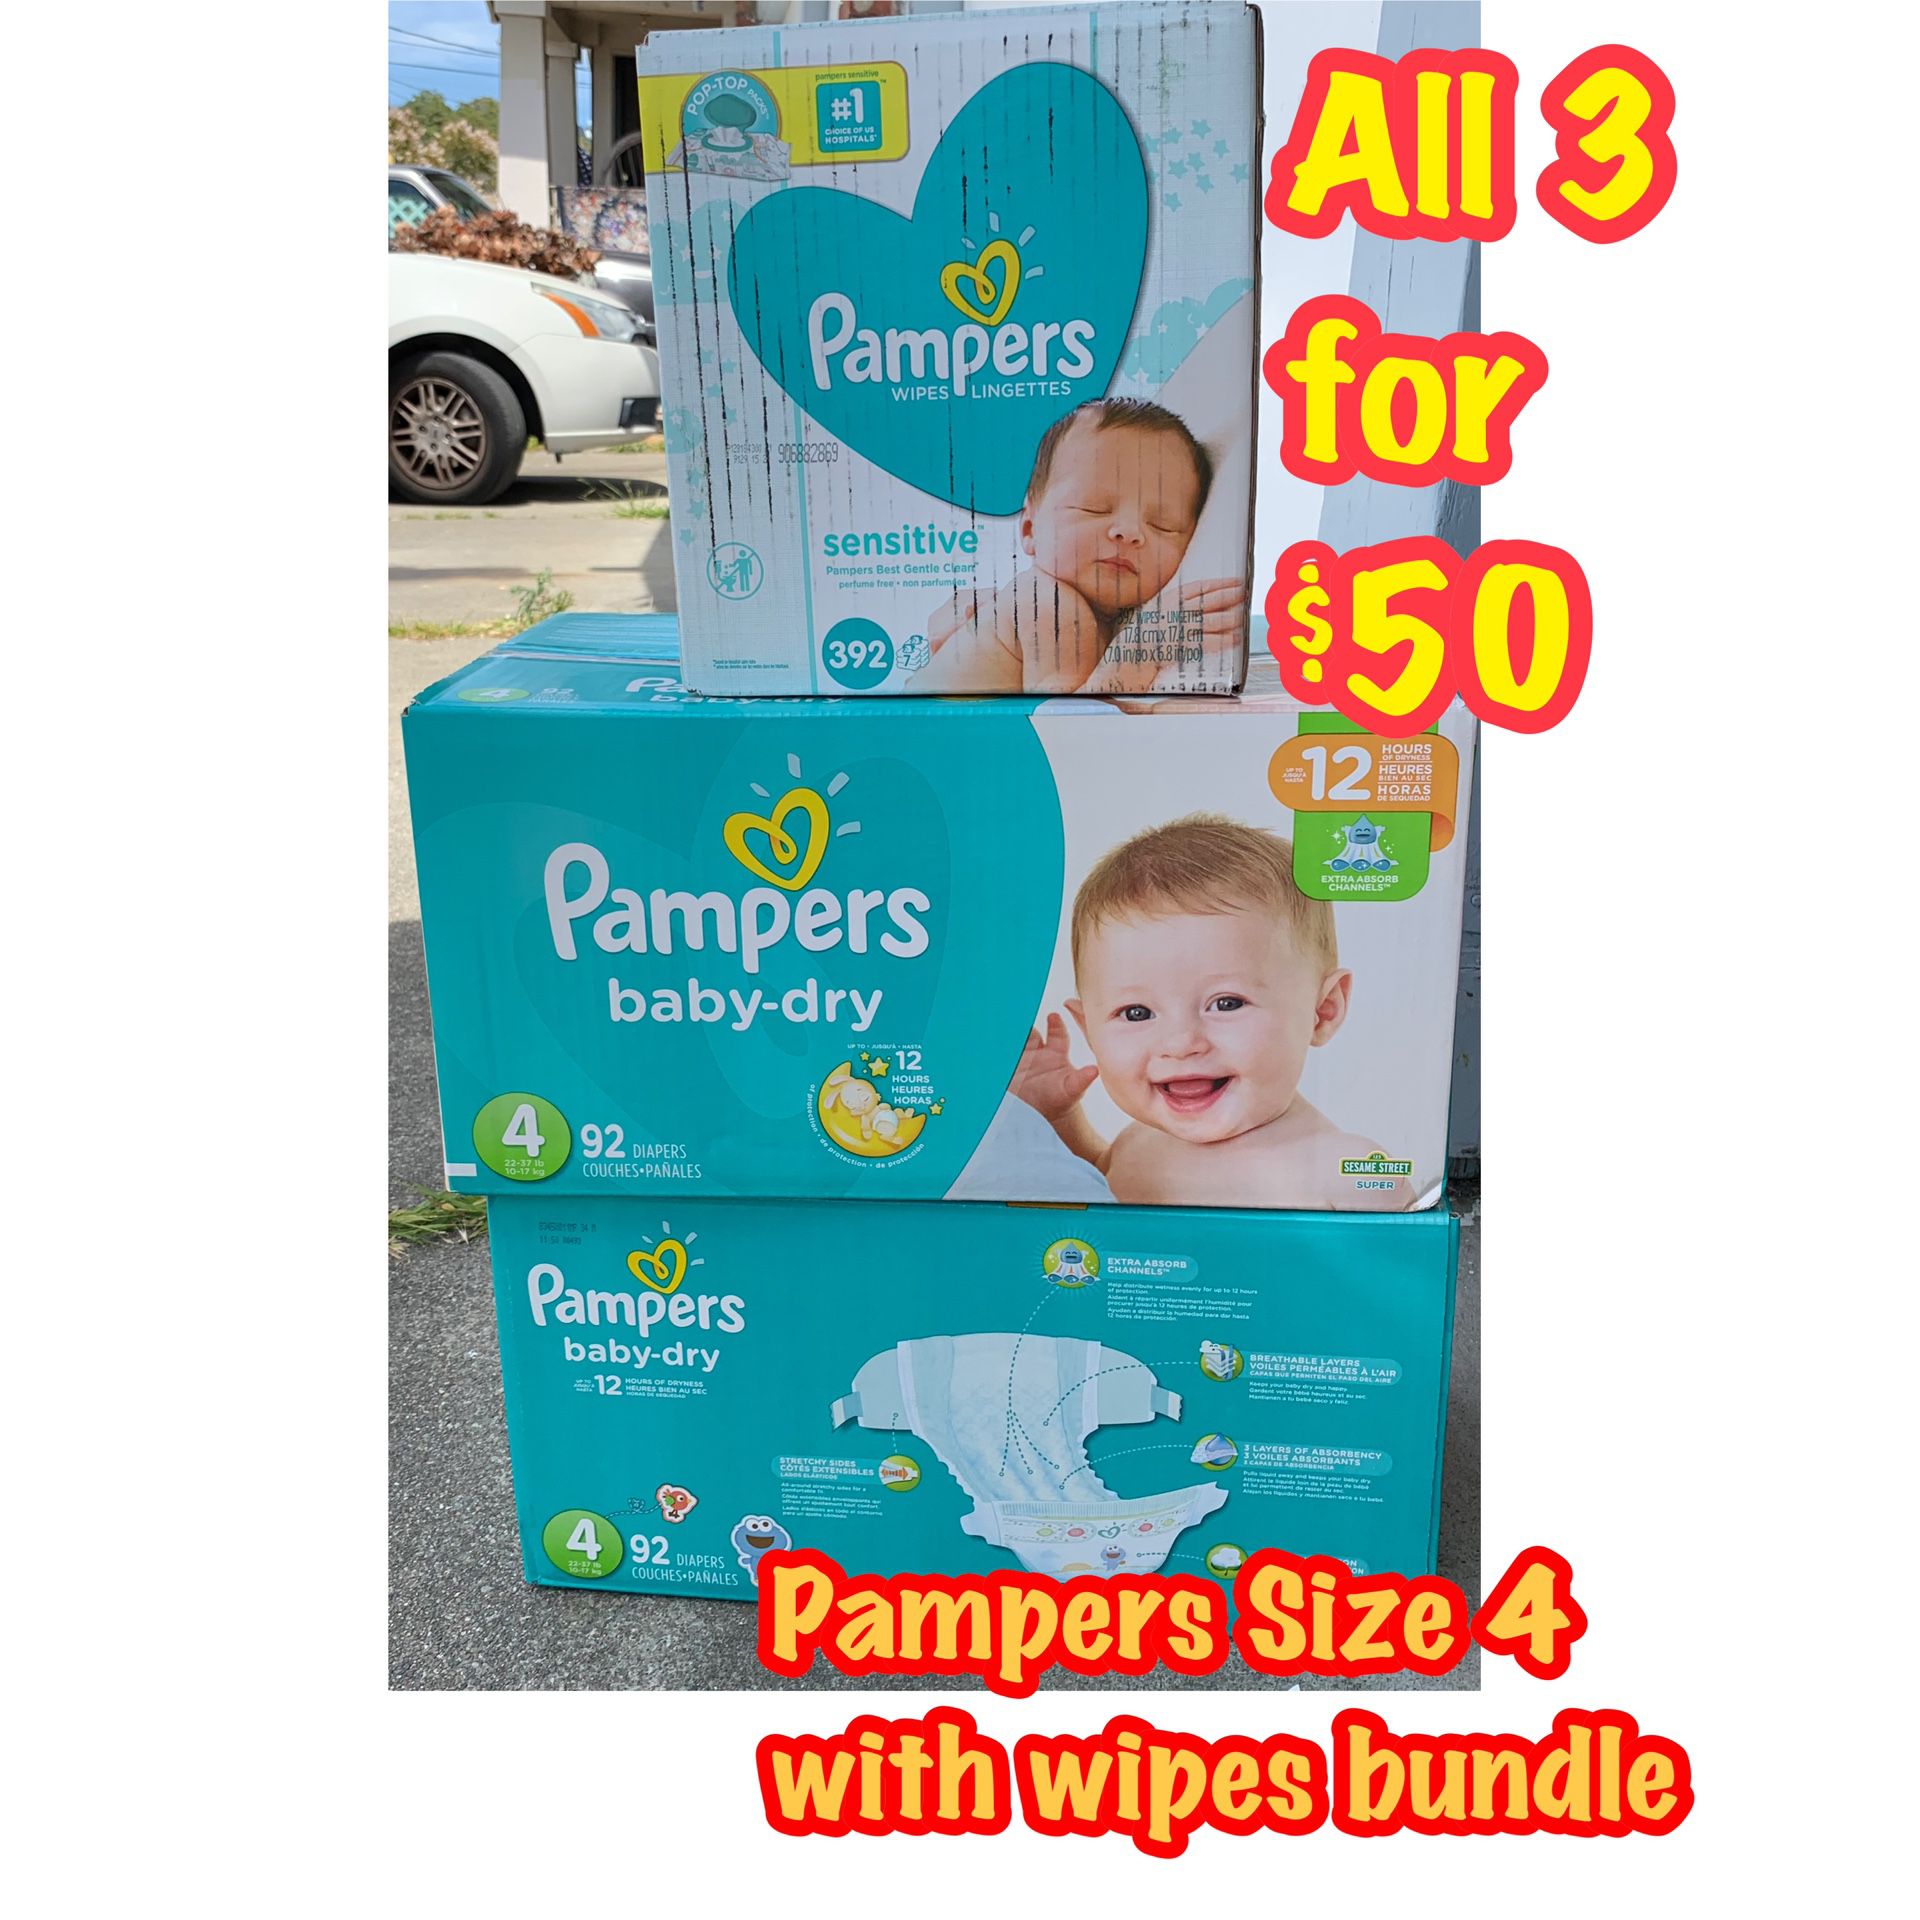 Pampers Size 4 diapers with wipes bundle